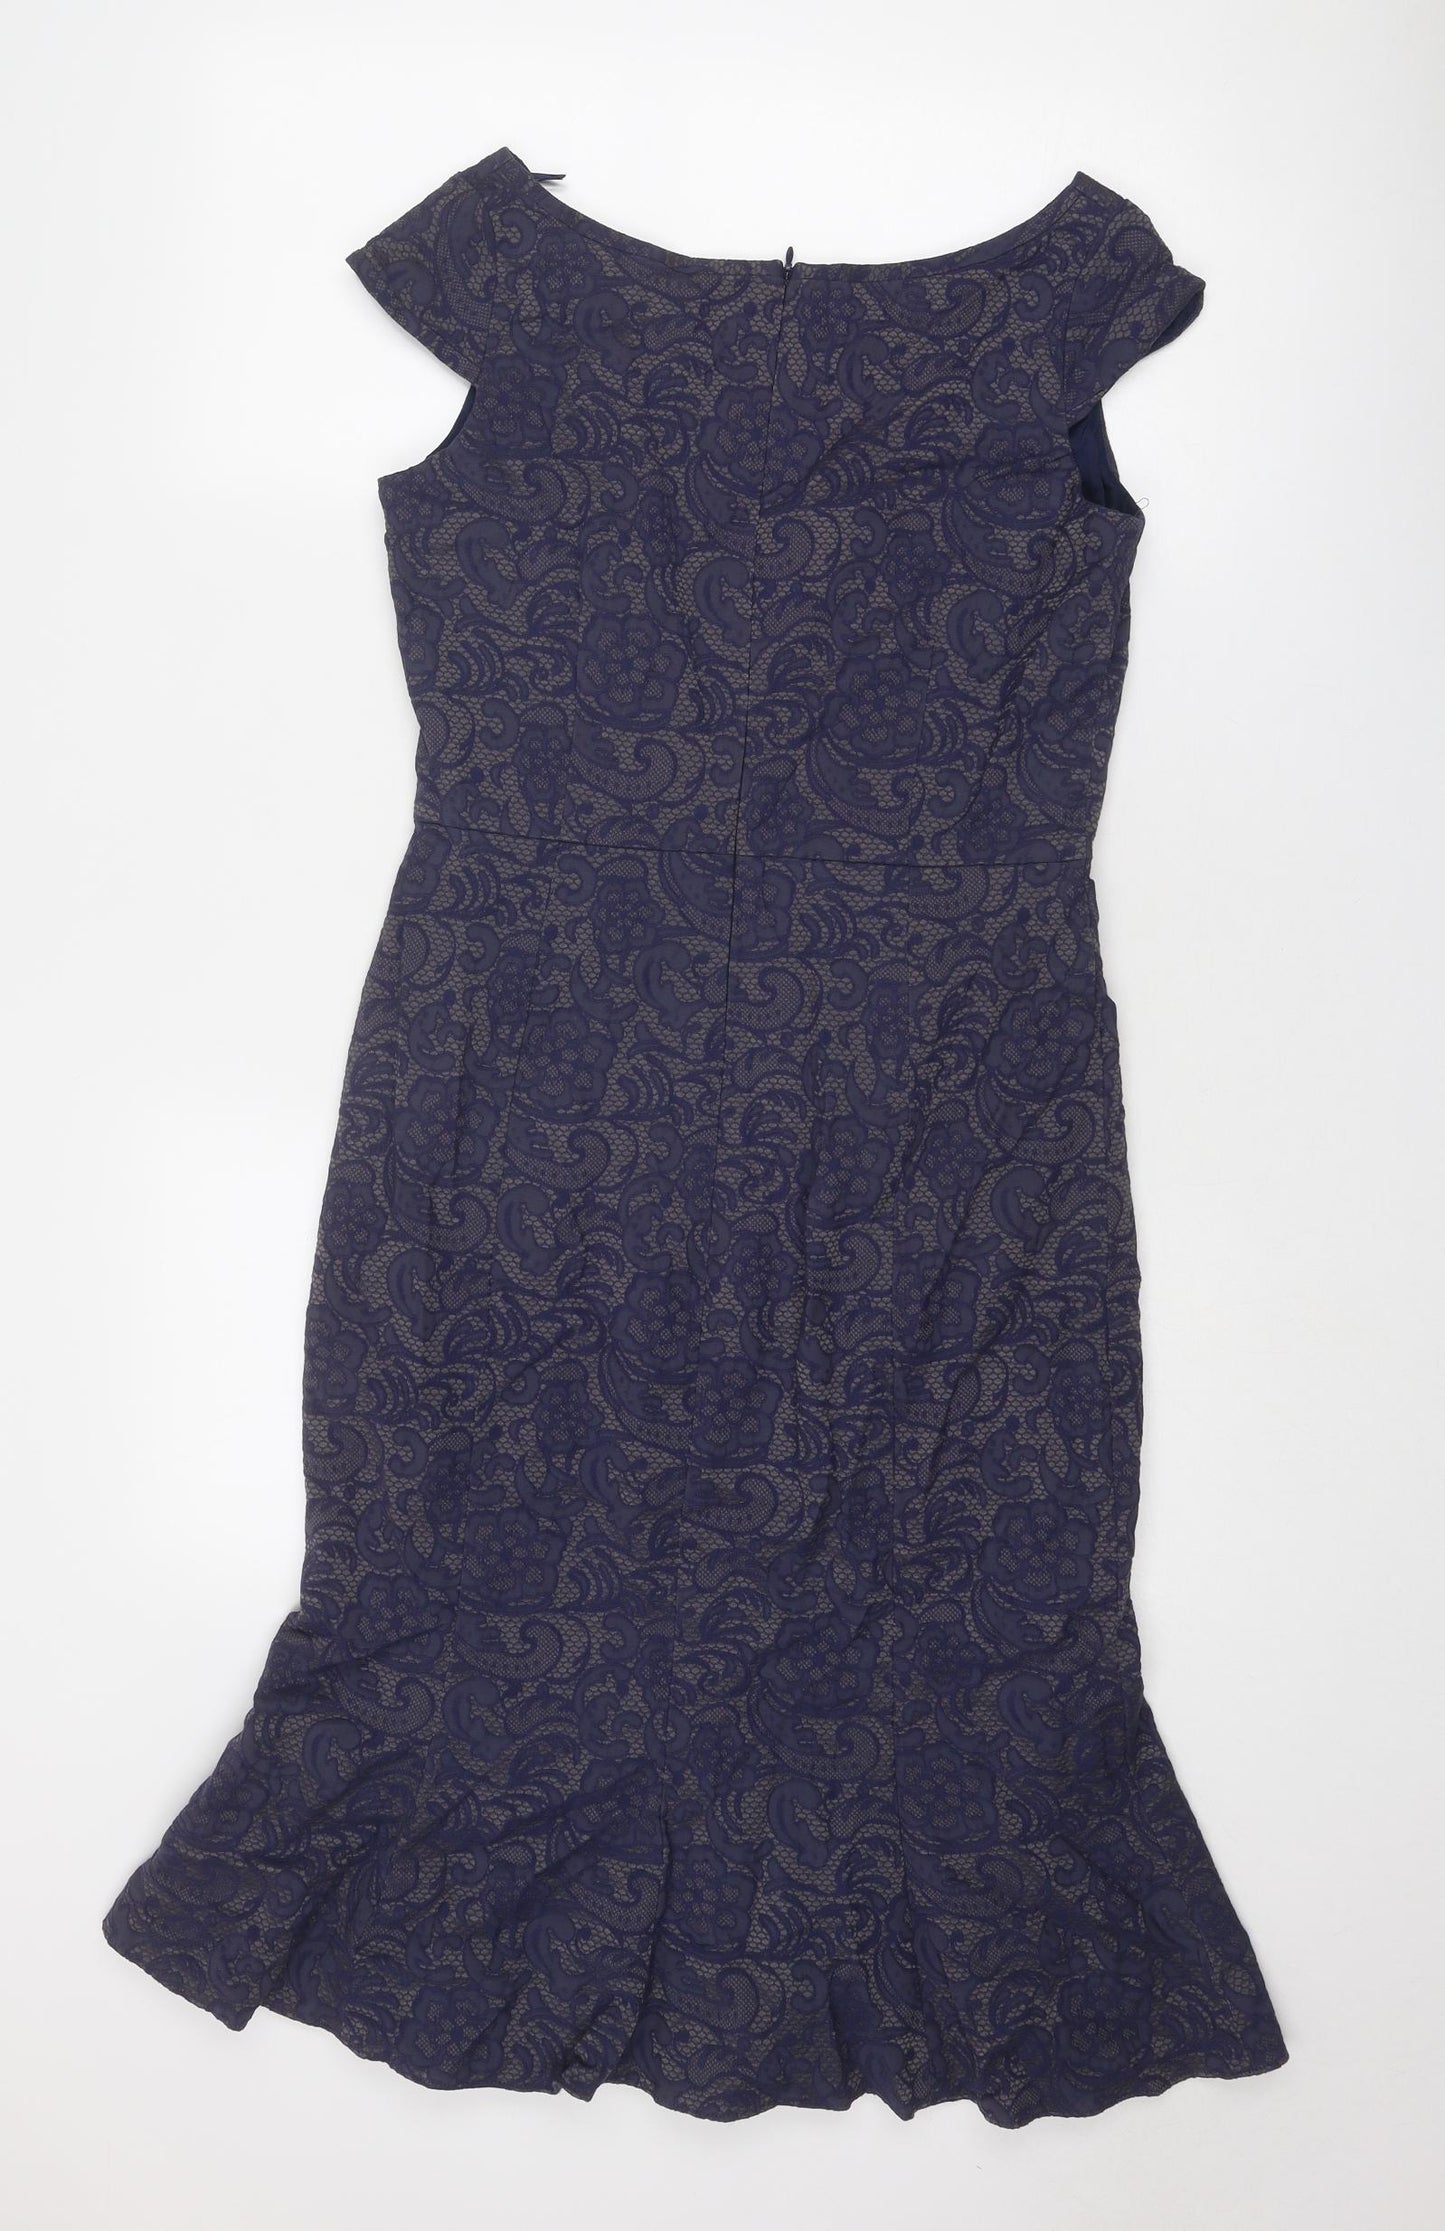 NEXT Womens Blue Floral Cotton Mermaid Size 10 V-Neck Zip - Lace Overlay